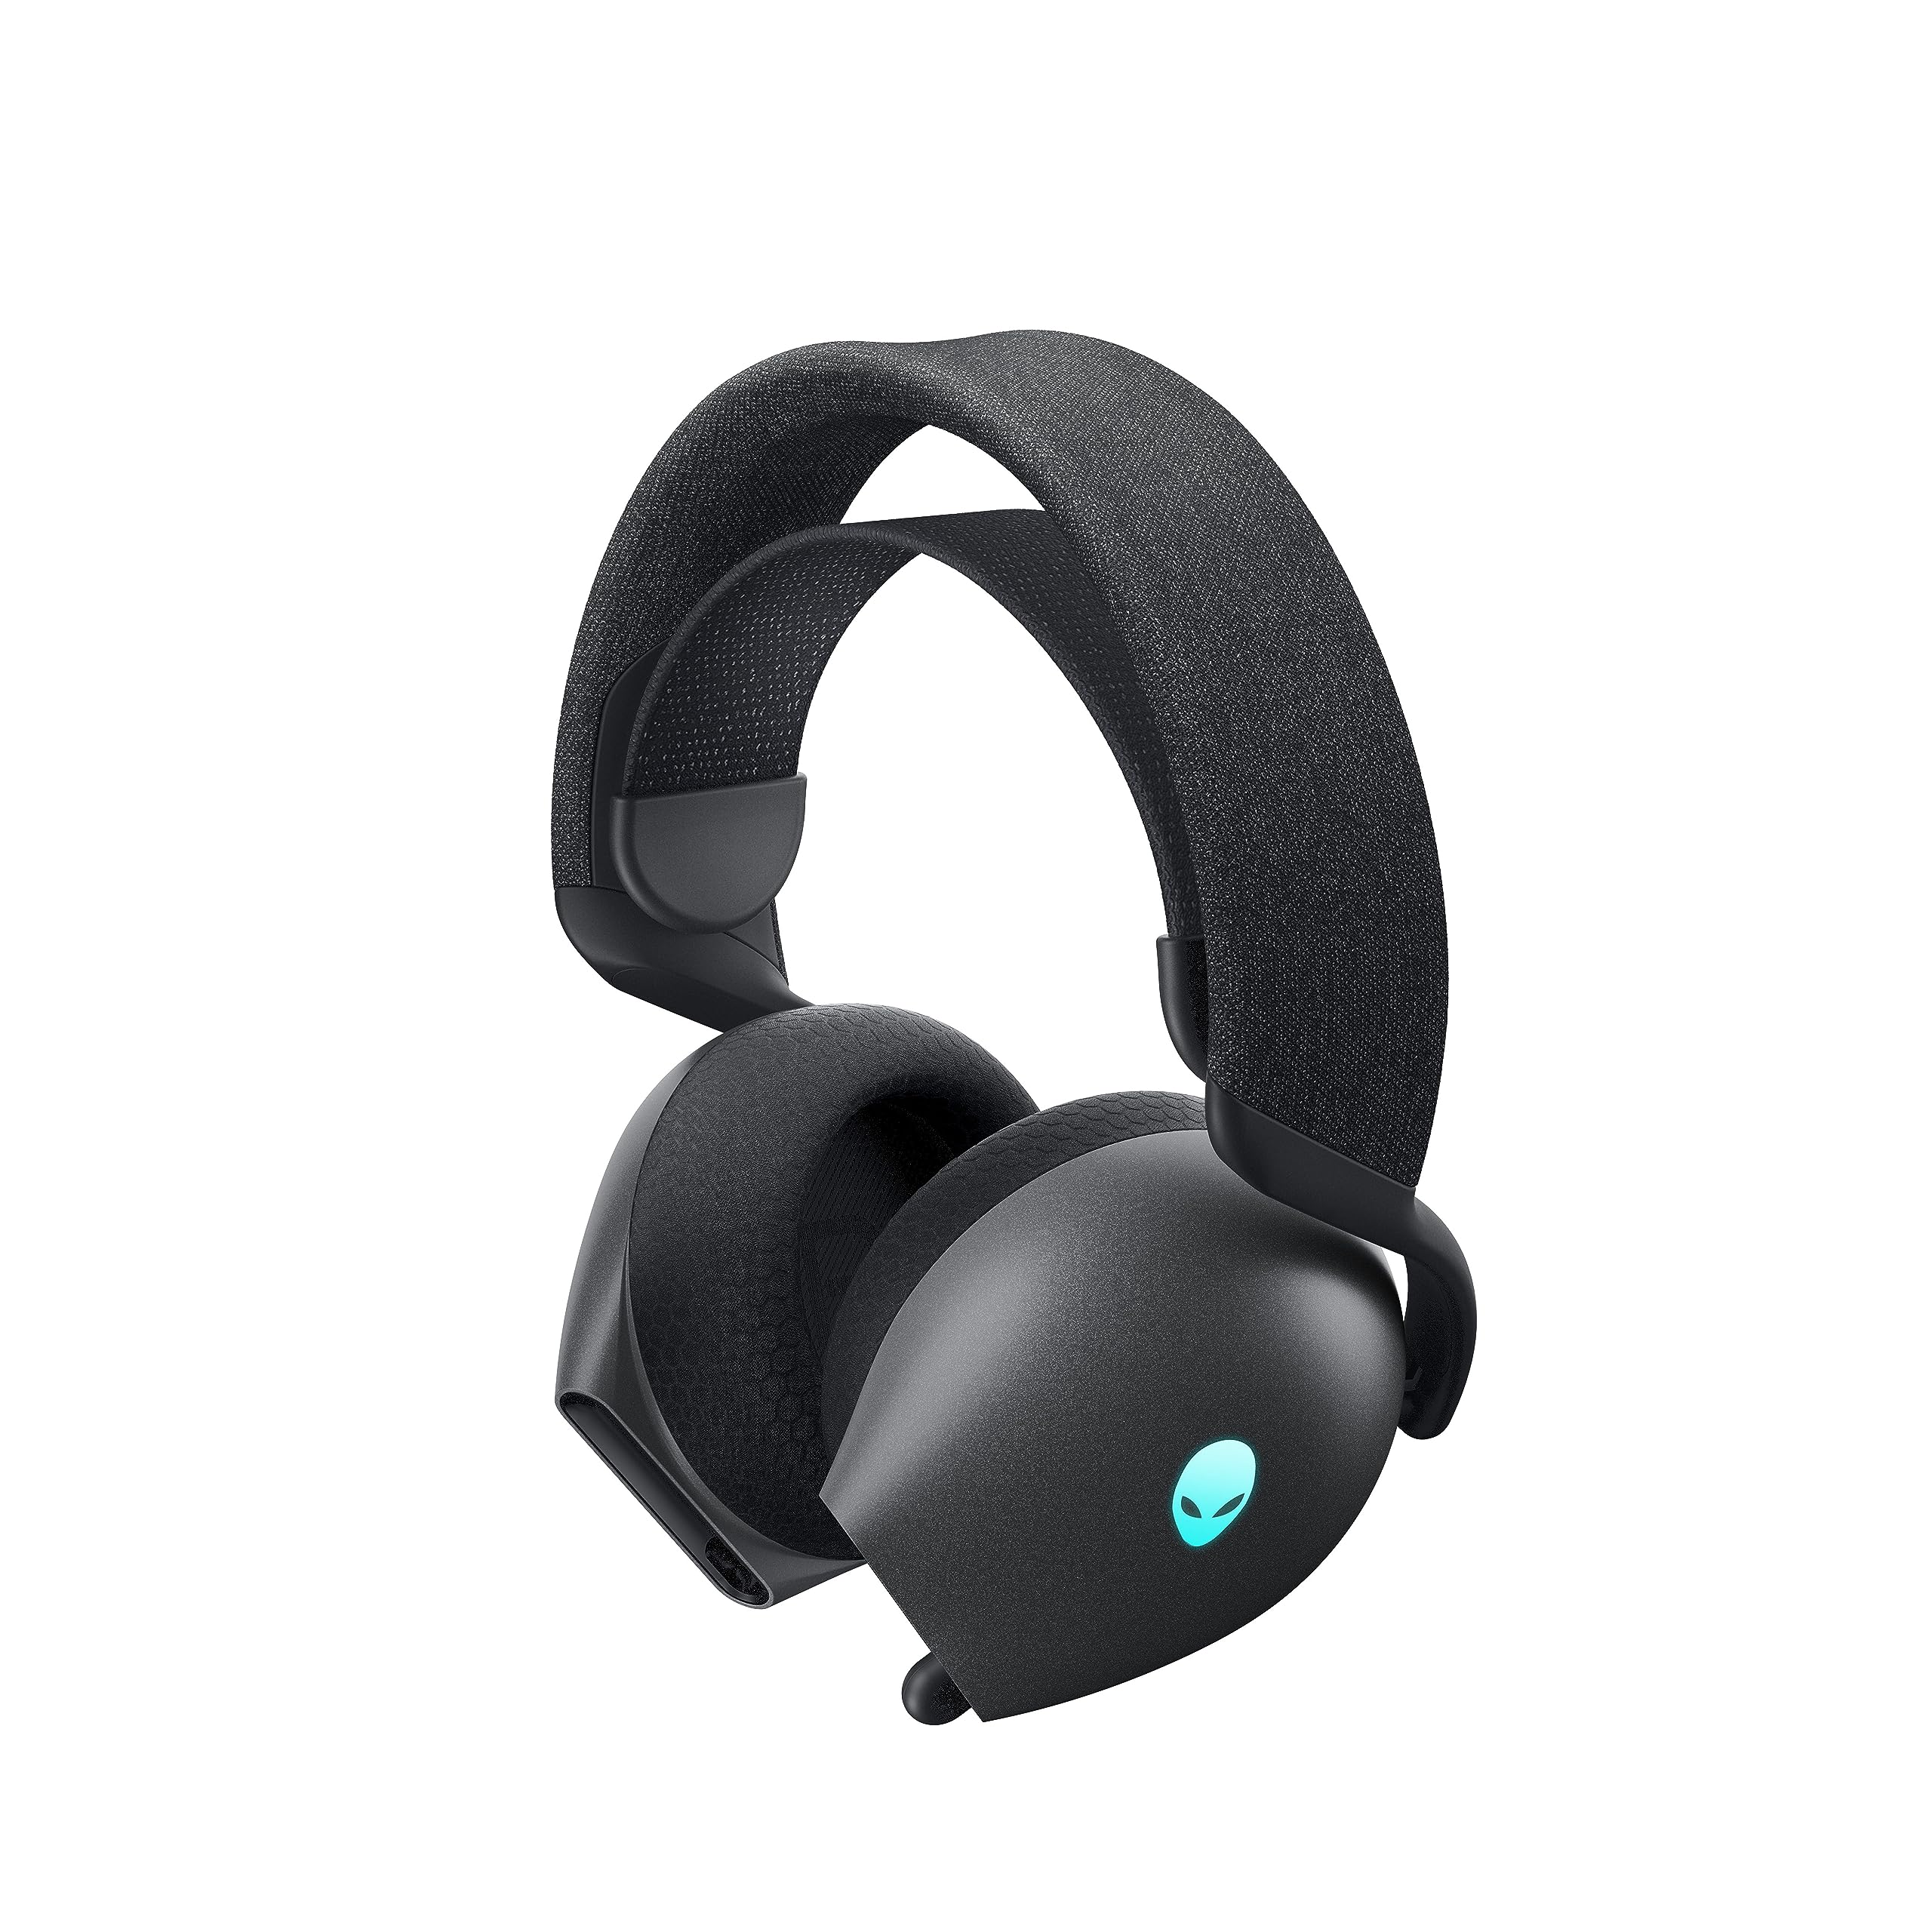 Alienware AW720H Dual-Mode Wireless Gaming Headset - Dolby Atmos Spatial Sound, Wireless 2.4 GHz, 3.5mm Connector Cable, In-line Controls, Integrated Microphone, Unidirectional - Dark Side of the Moon